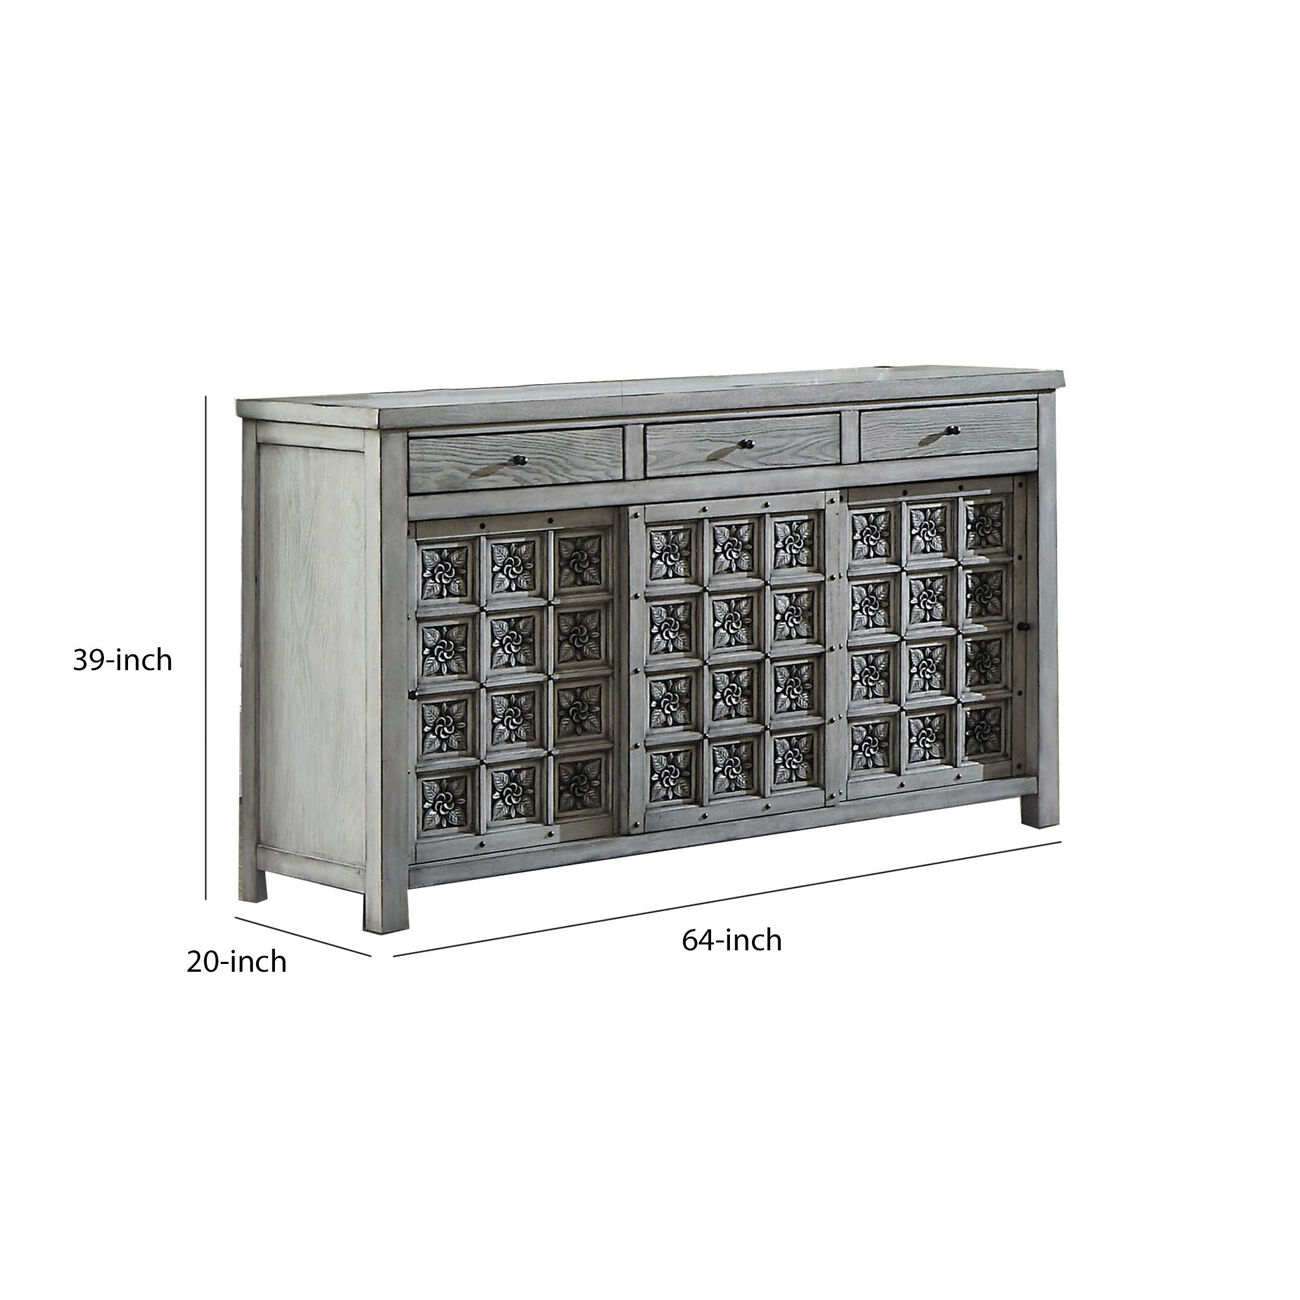 3 Drawer Transitional Wooden Dresser with Floral Engraving, Gray